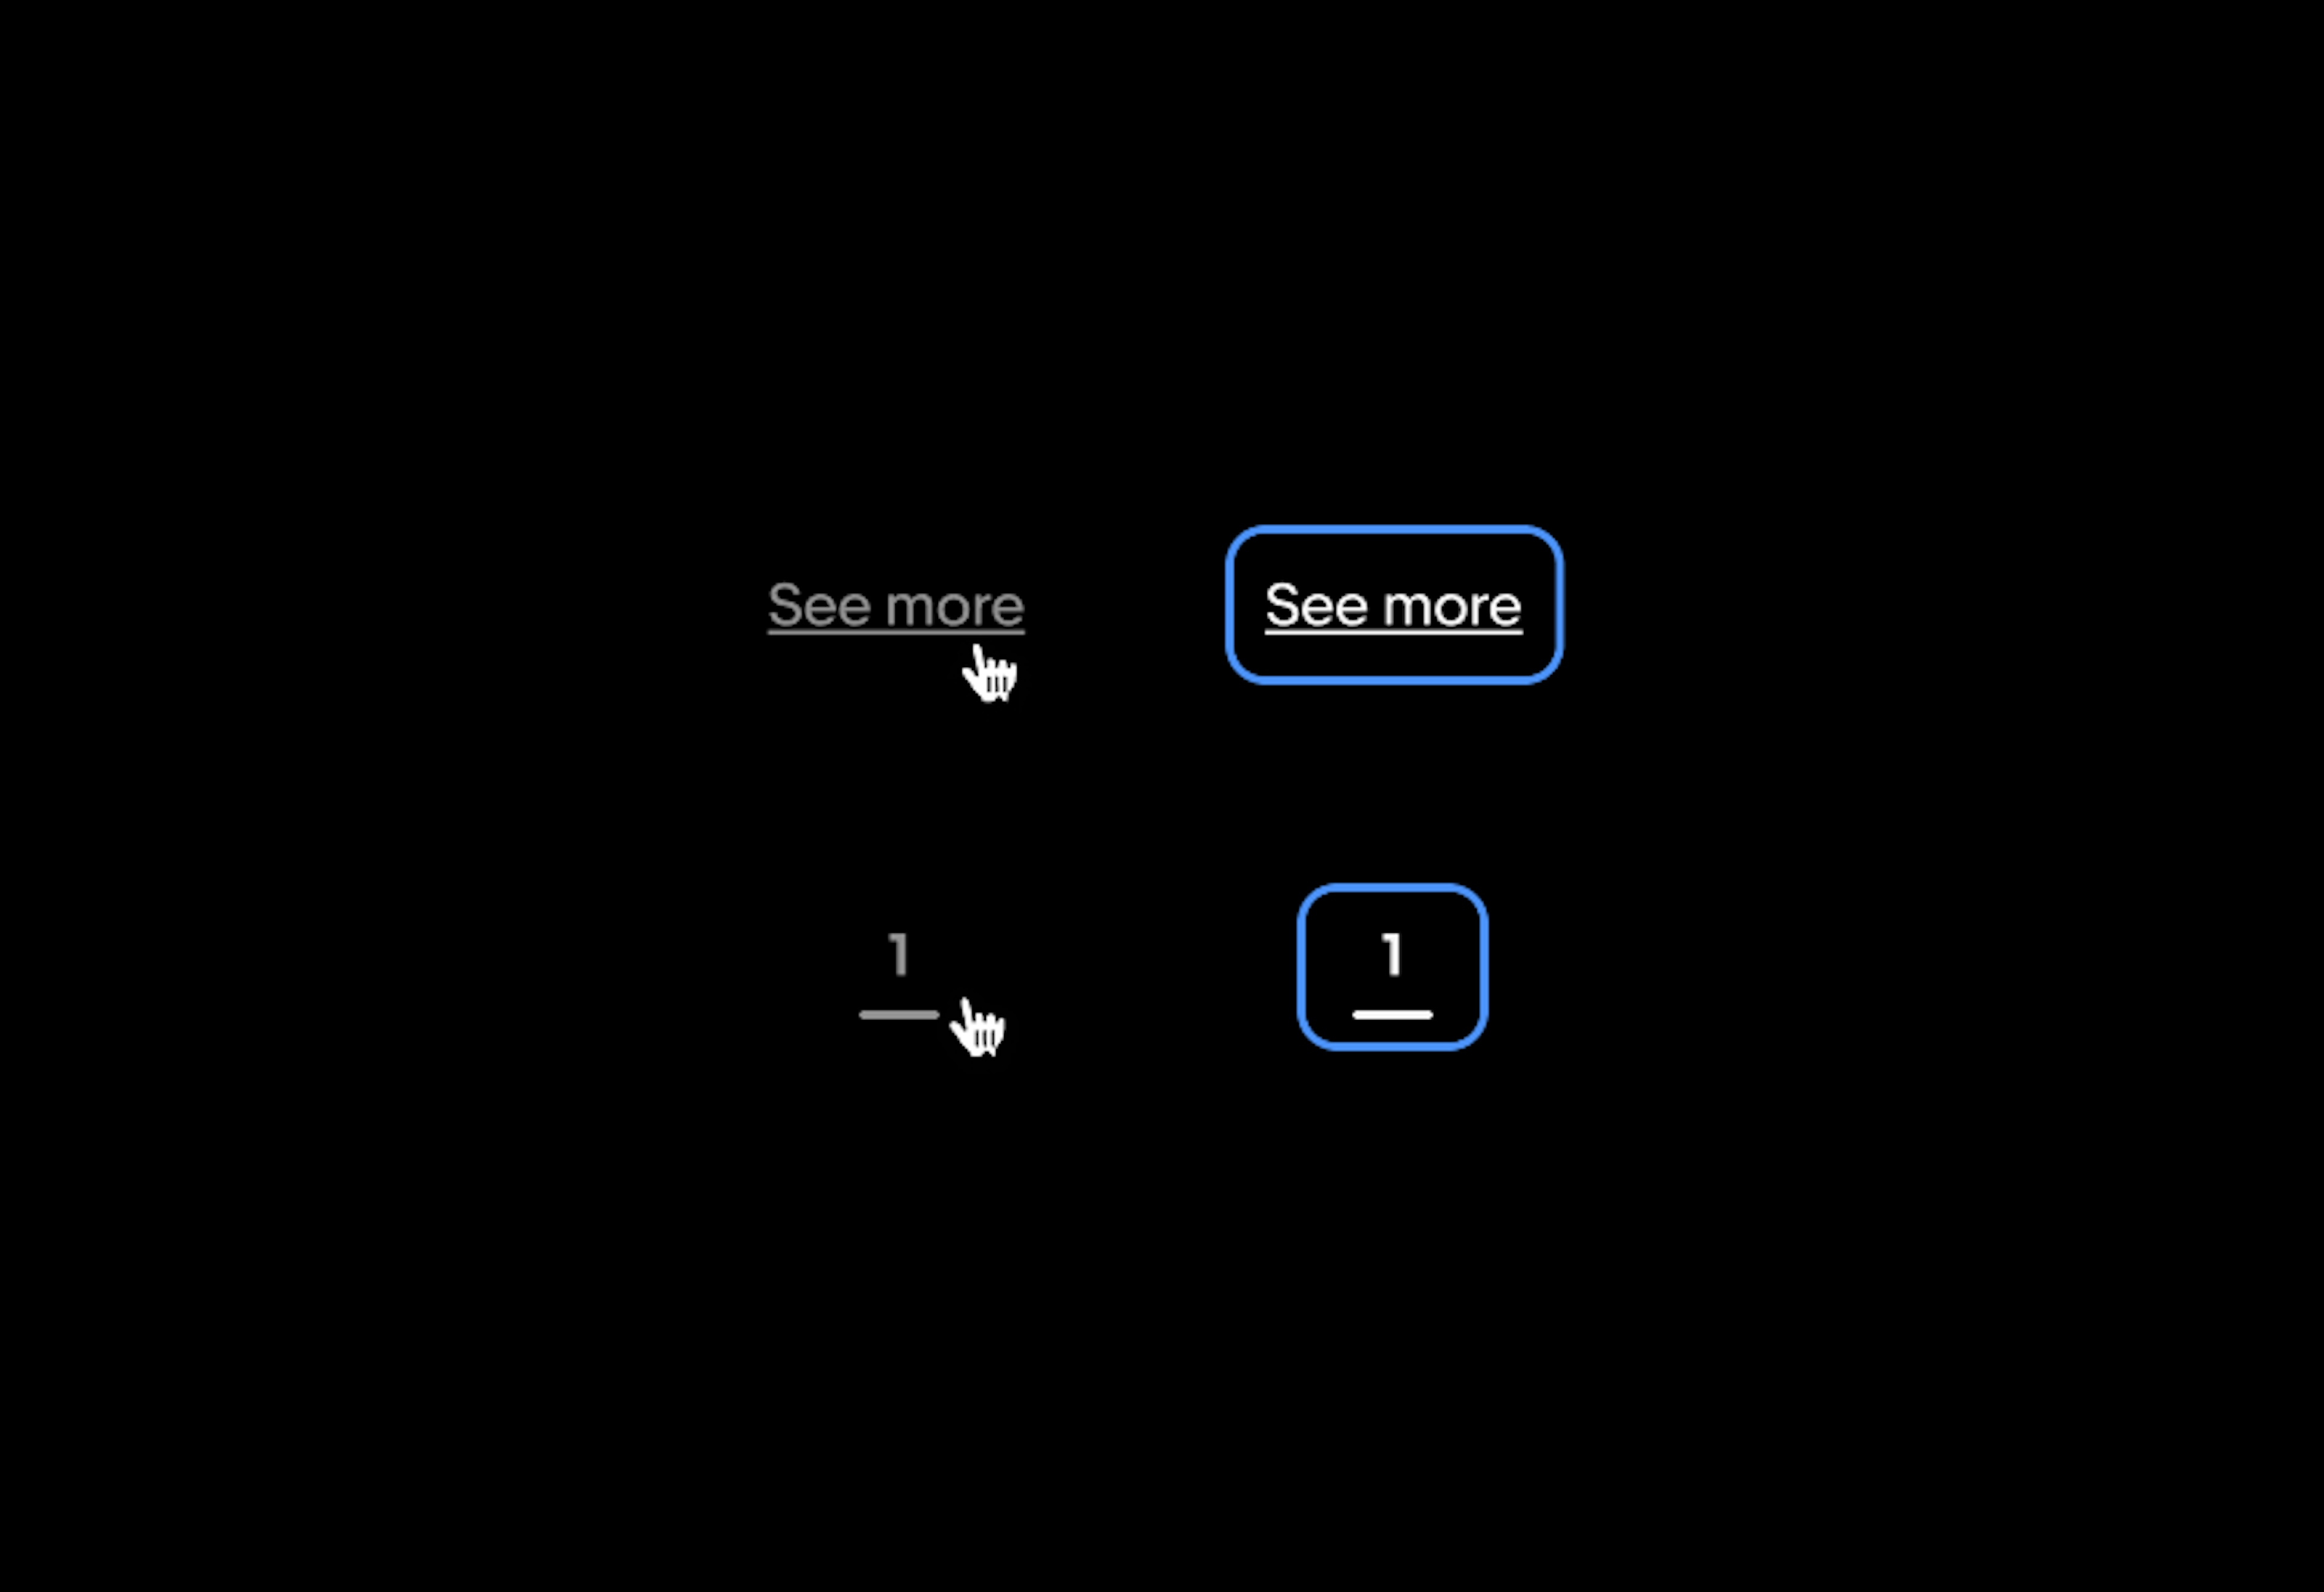 Two rows of text links in dark mode. The first row is a “See more” text link. The left example is hovered with a pointer hand icon and an opacity applied. The right example is a focused state with the blue stroke without the opacity applied. The second row is a page indicator with “1” in the same treatments.